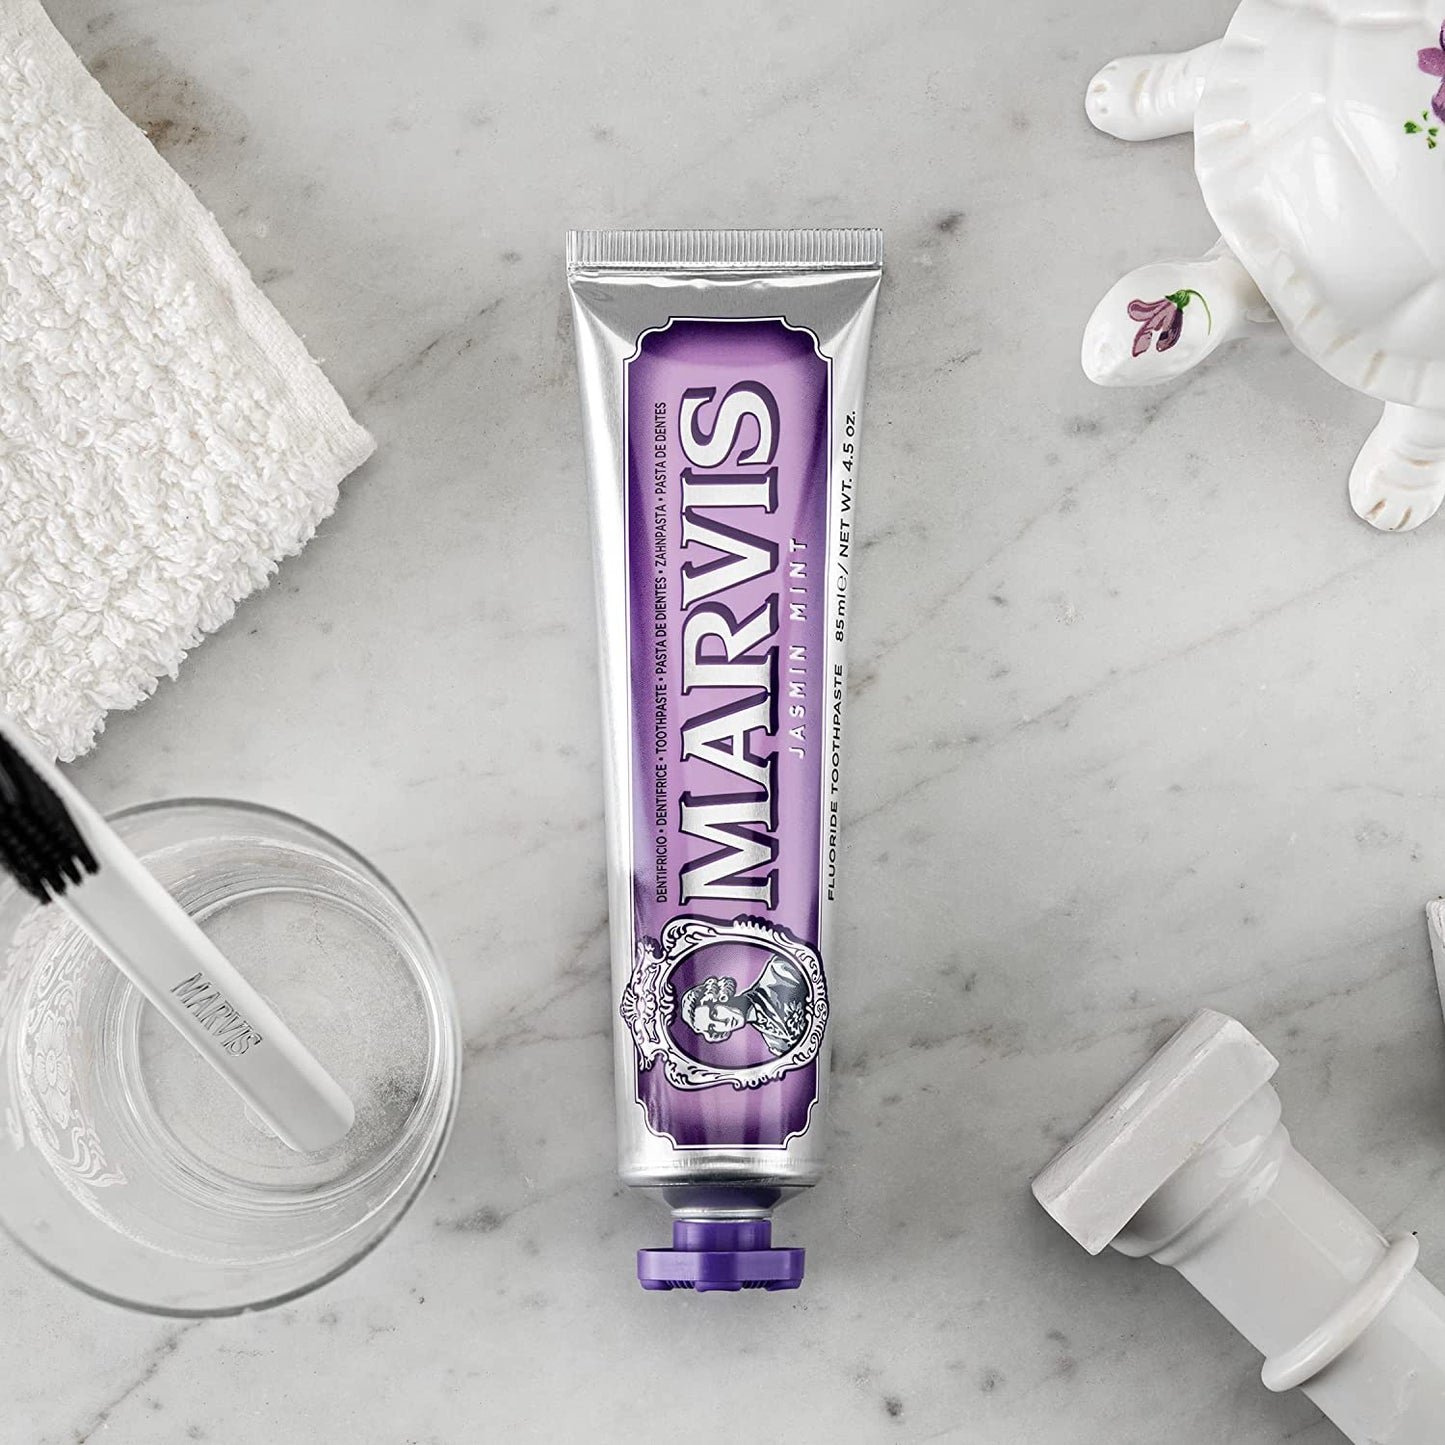 Marvis Jasmine Mint Toothpaste, 85 ml, Sensational Flavoured Toothpaste Helps Remove Plaque & Promote Healthy Gums with Long-Lasting Freshness